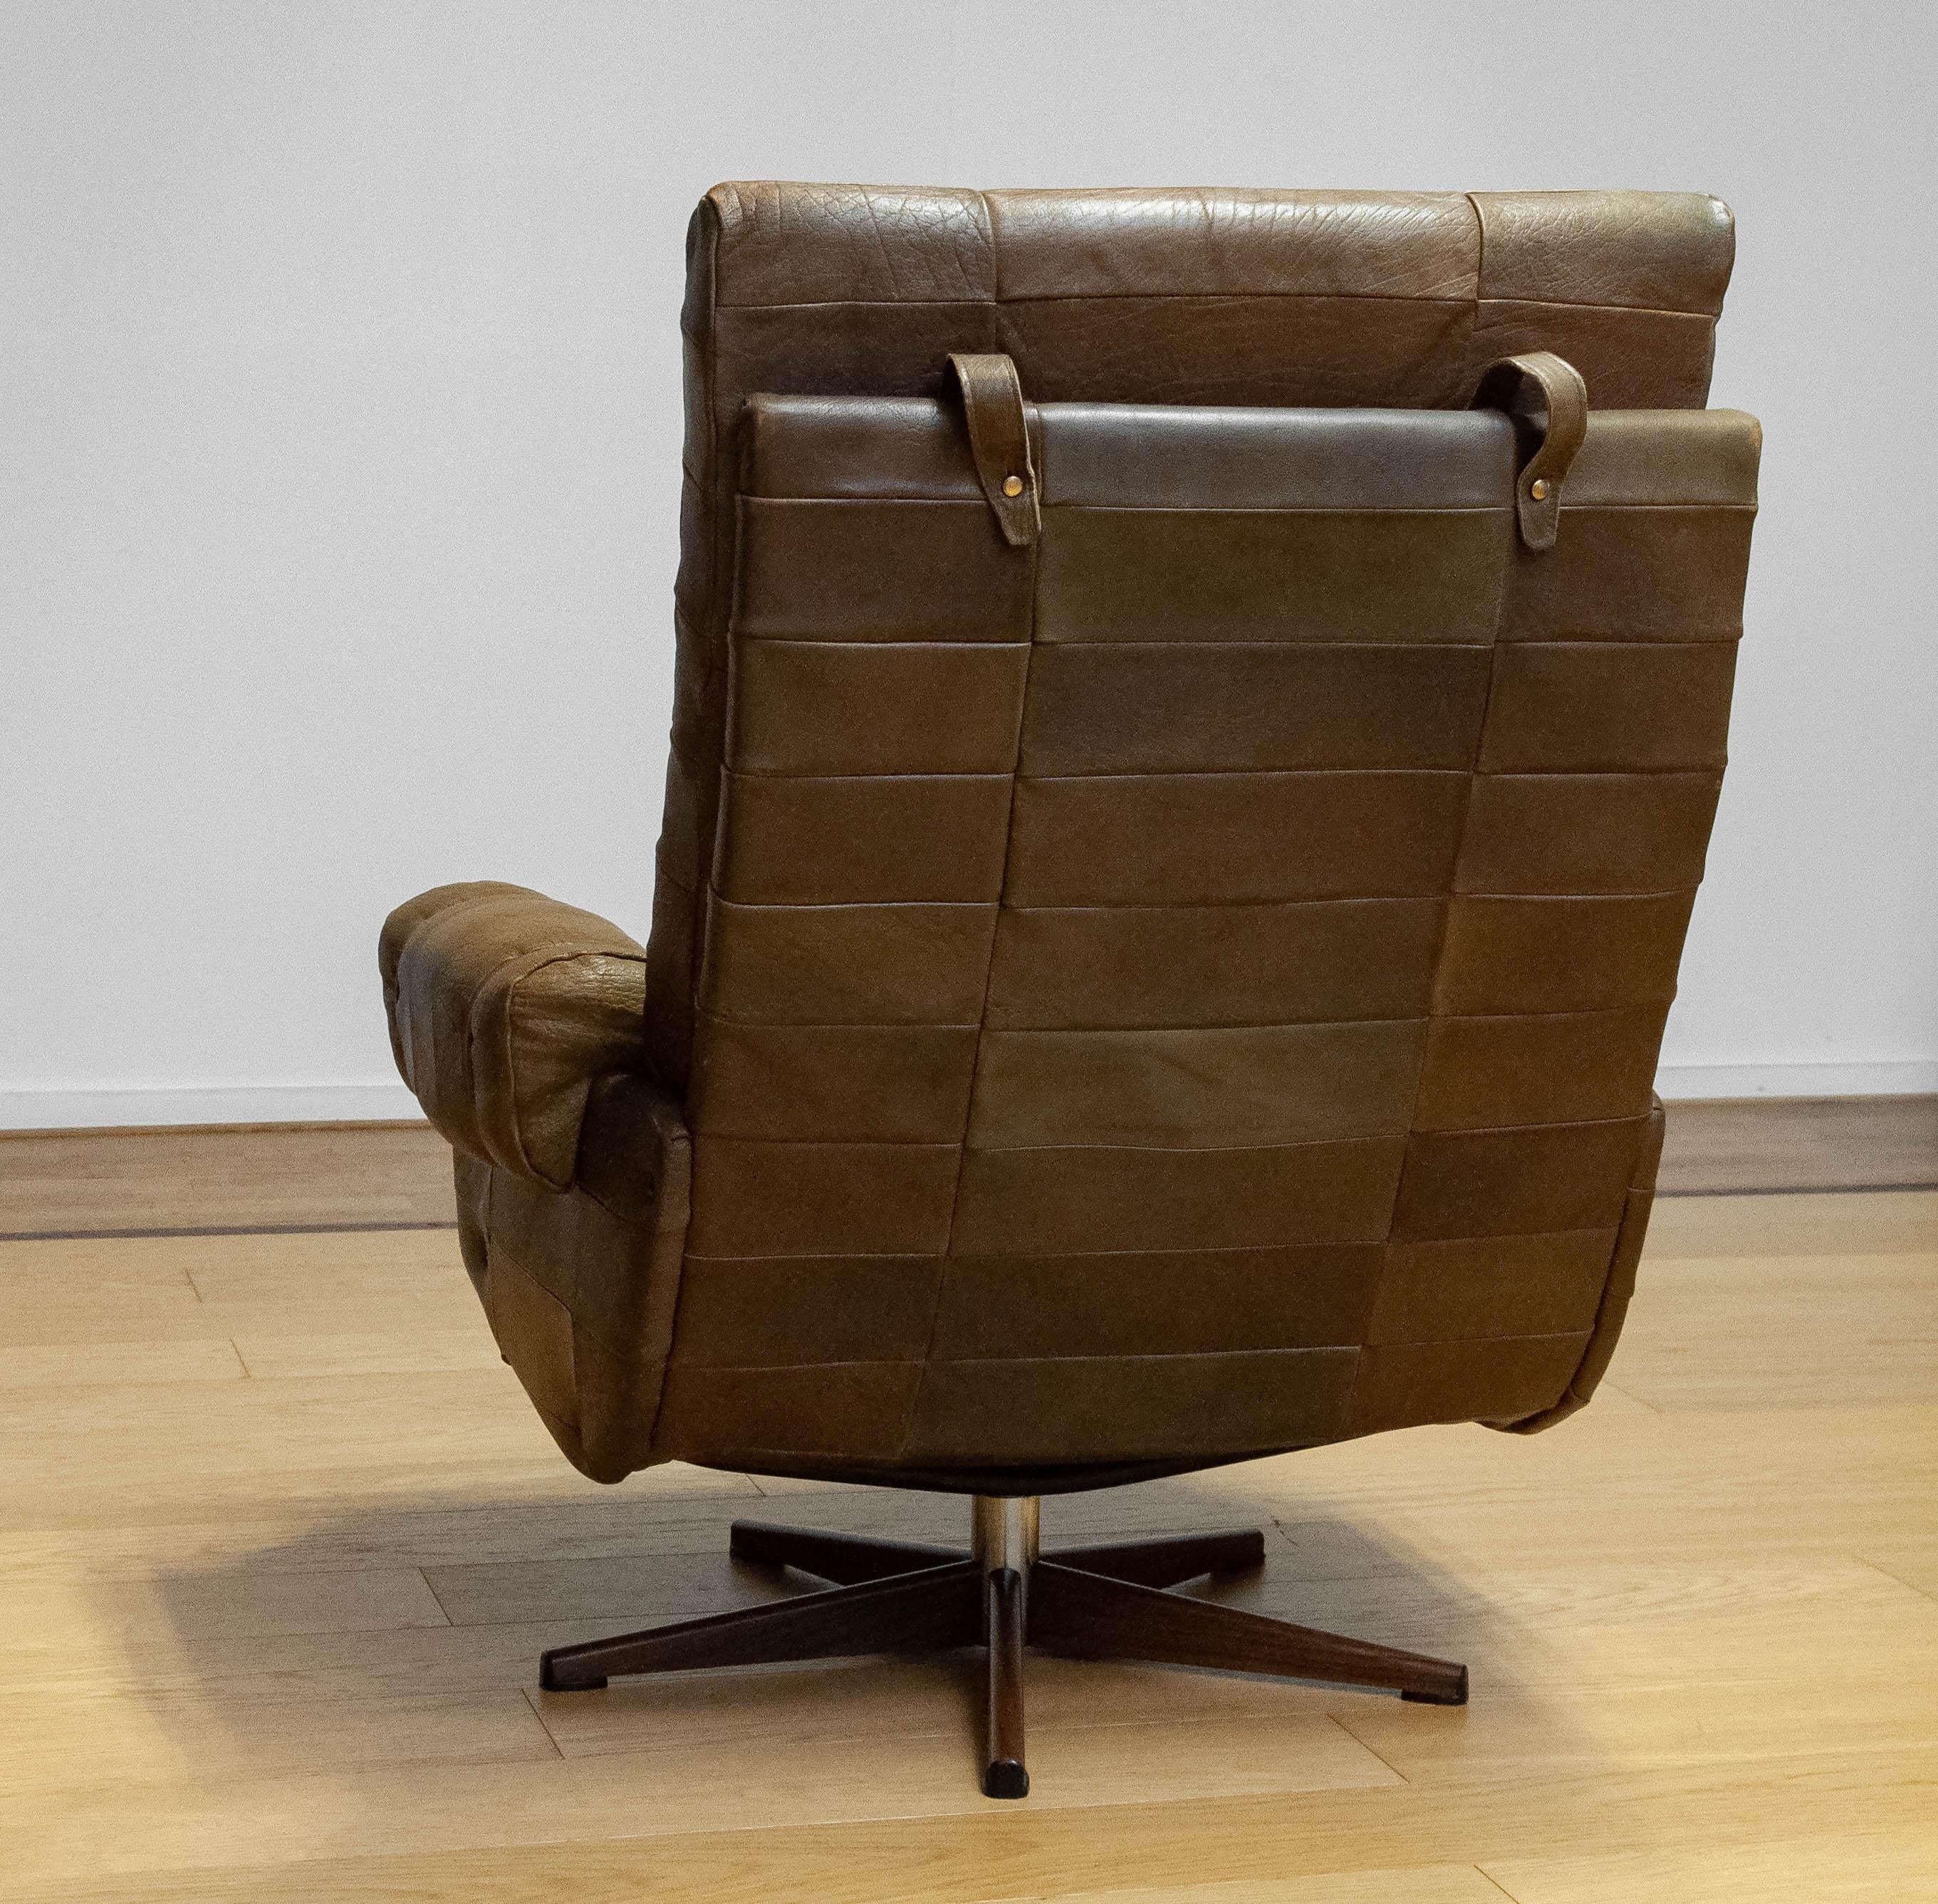 70s Swivel Chair By Arne Norell Möbel AB In Sturdy Olive Green Patchwork Leather For Sale 3